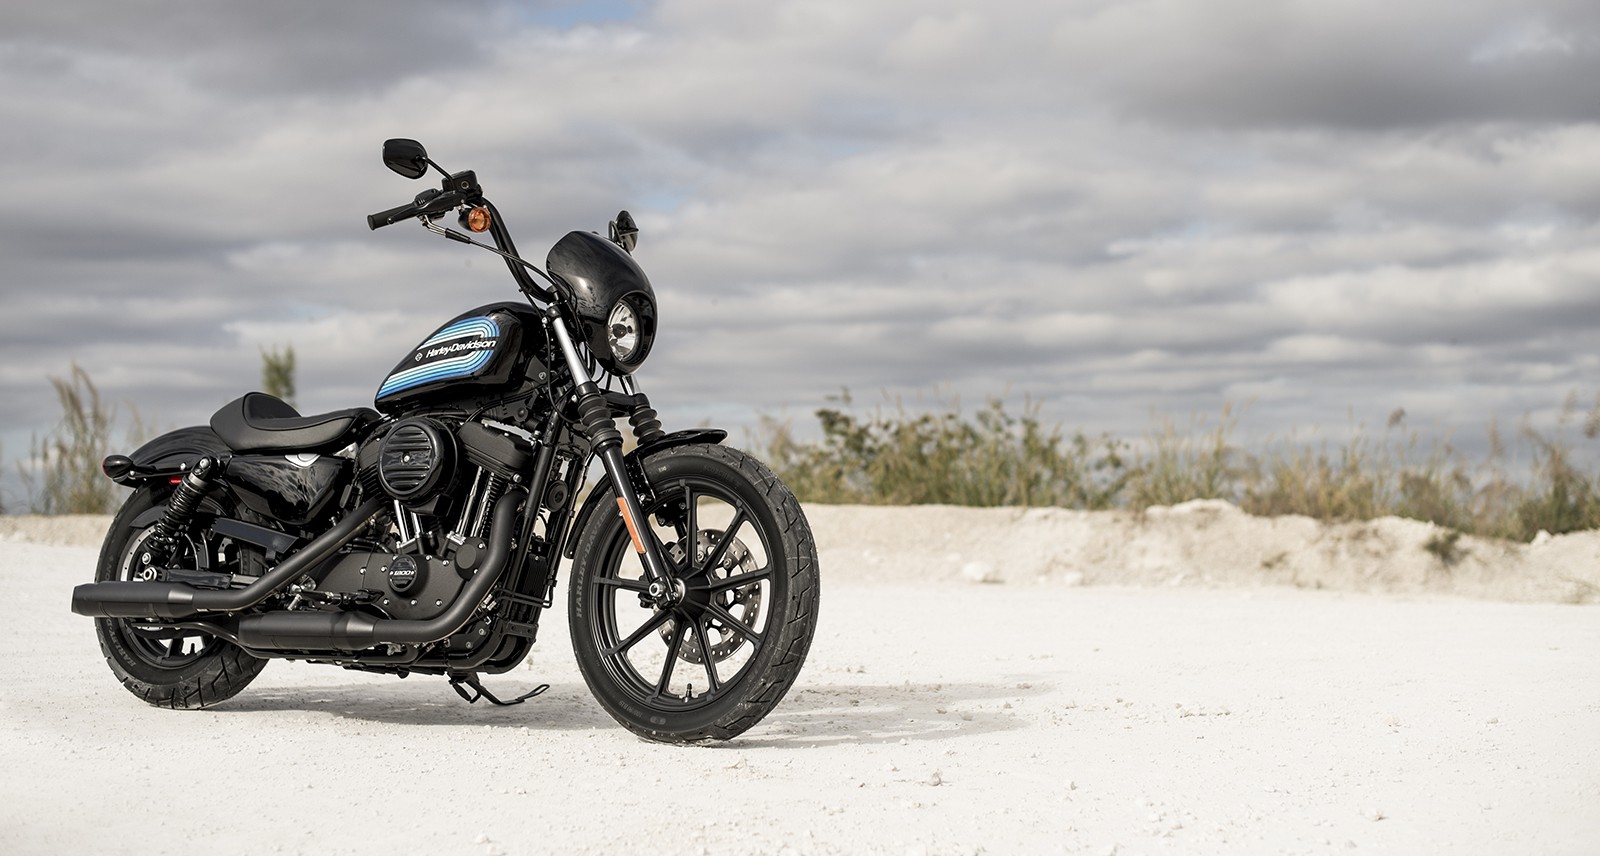 Your Morning Commute Will Be Considerably More Pleasant in Harley-Davidson's Sportster Iron 1200